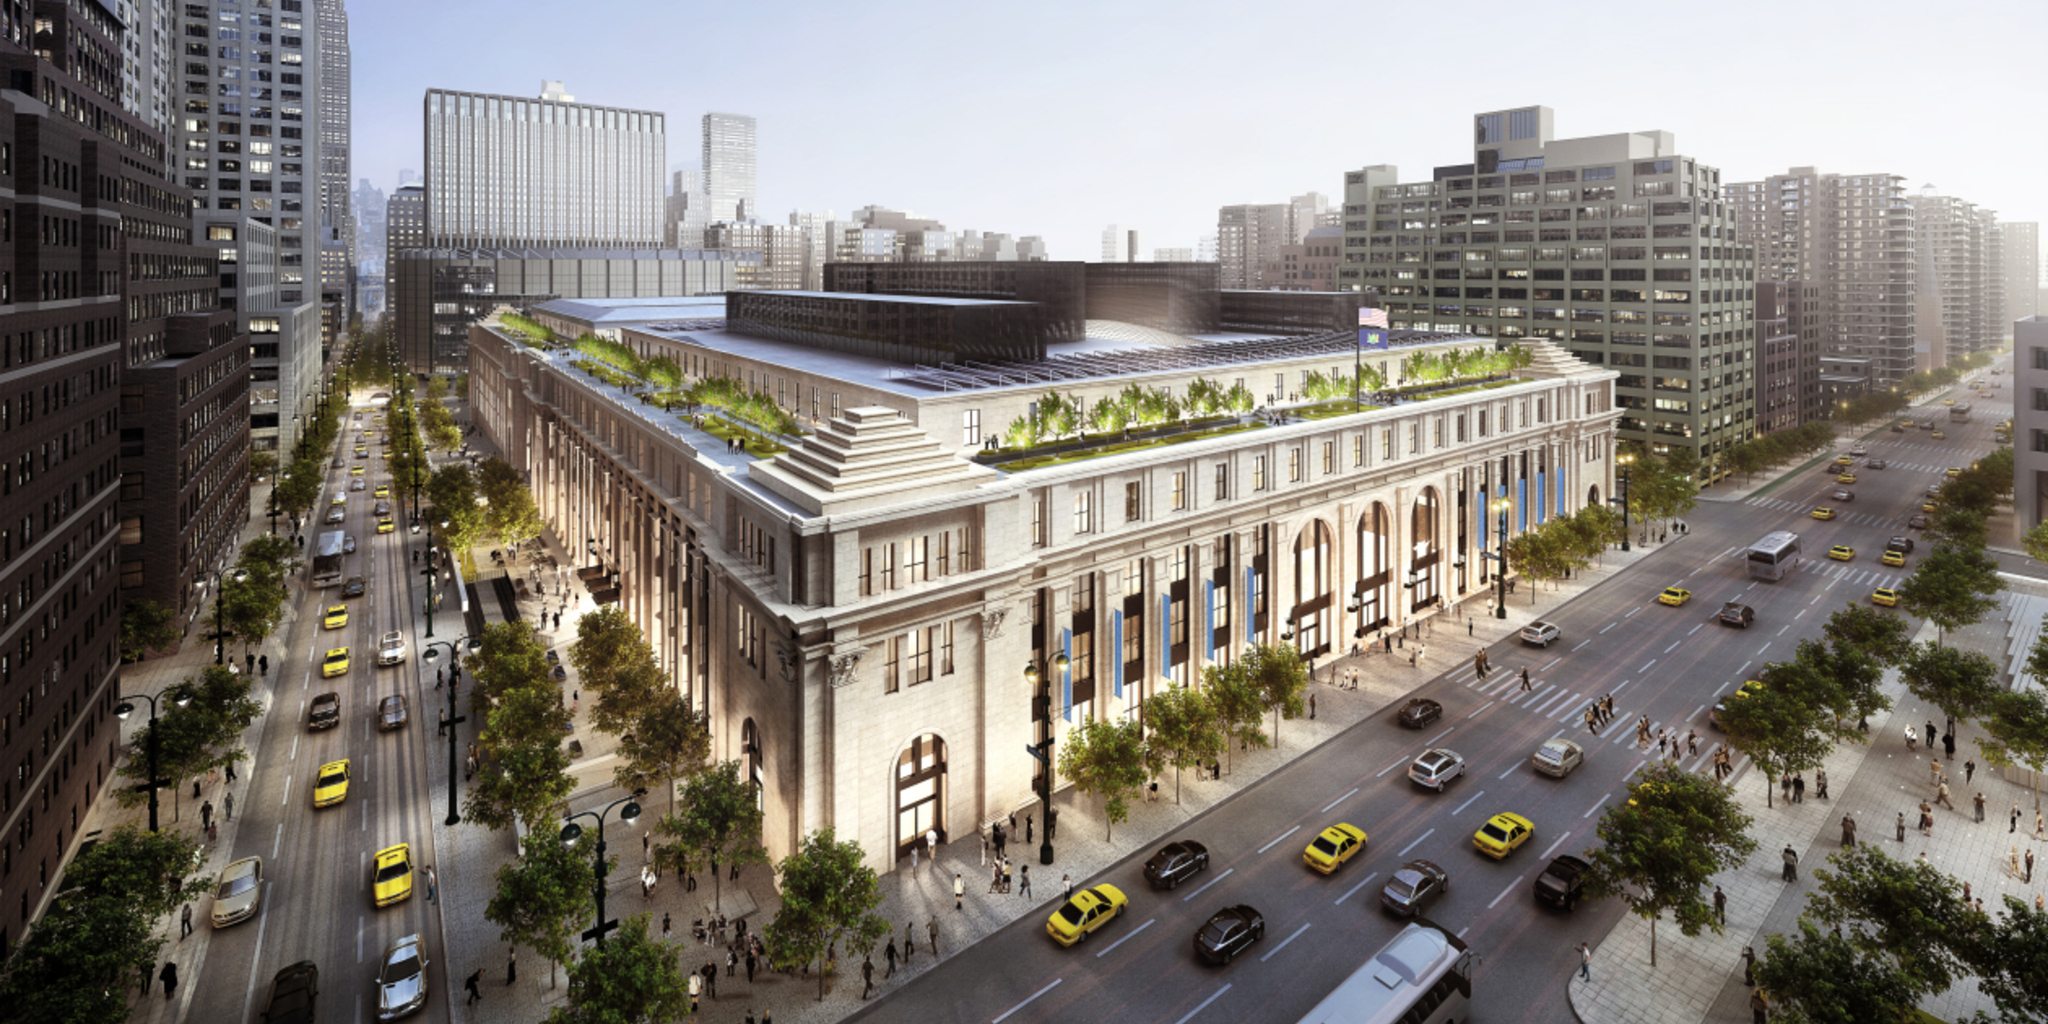 Biotech gains ground in NYC Sprawling research center planned in 1.6B